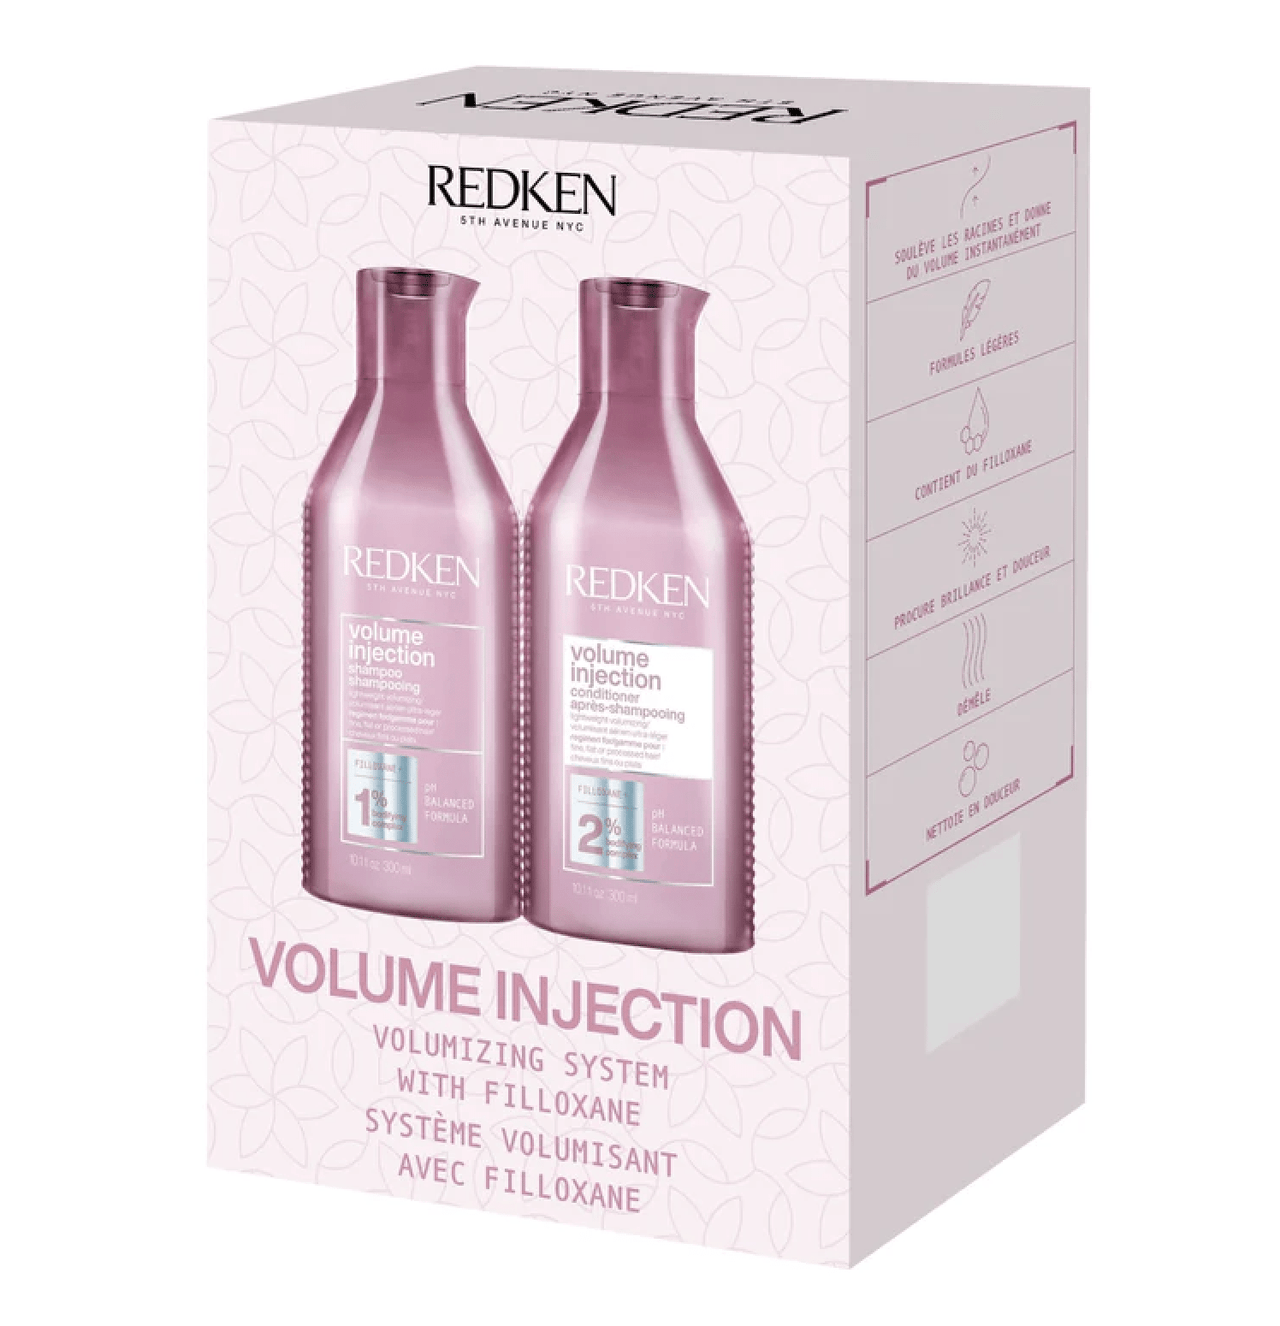 REDKEN_Volume Injection Spring Duo_Cosmetic World